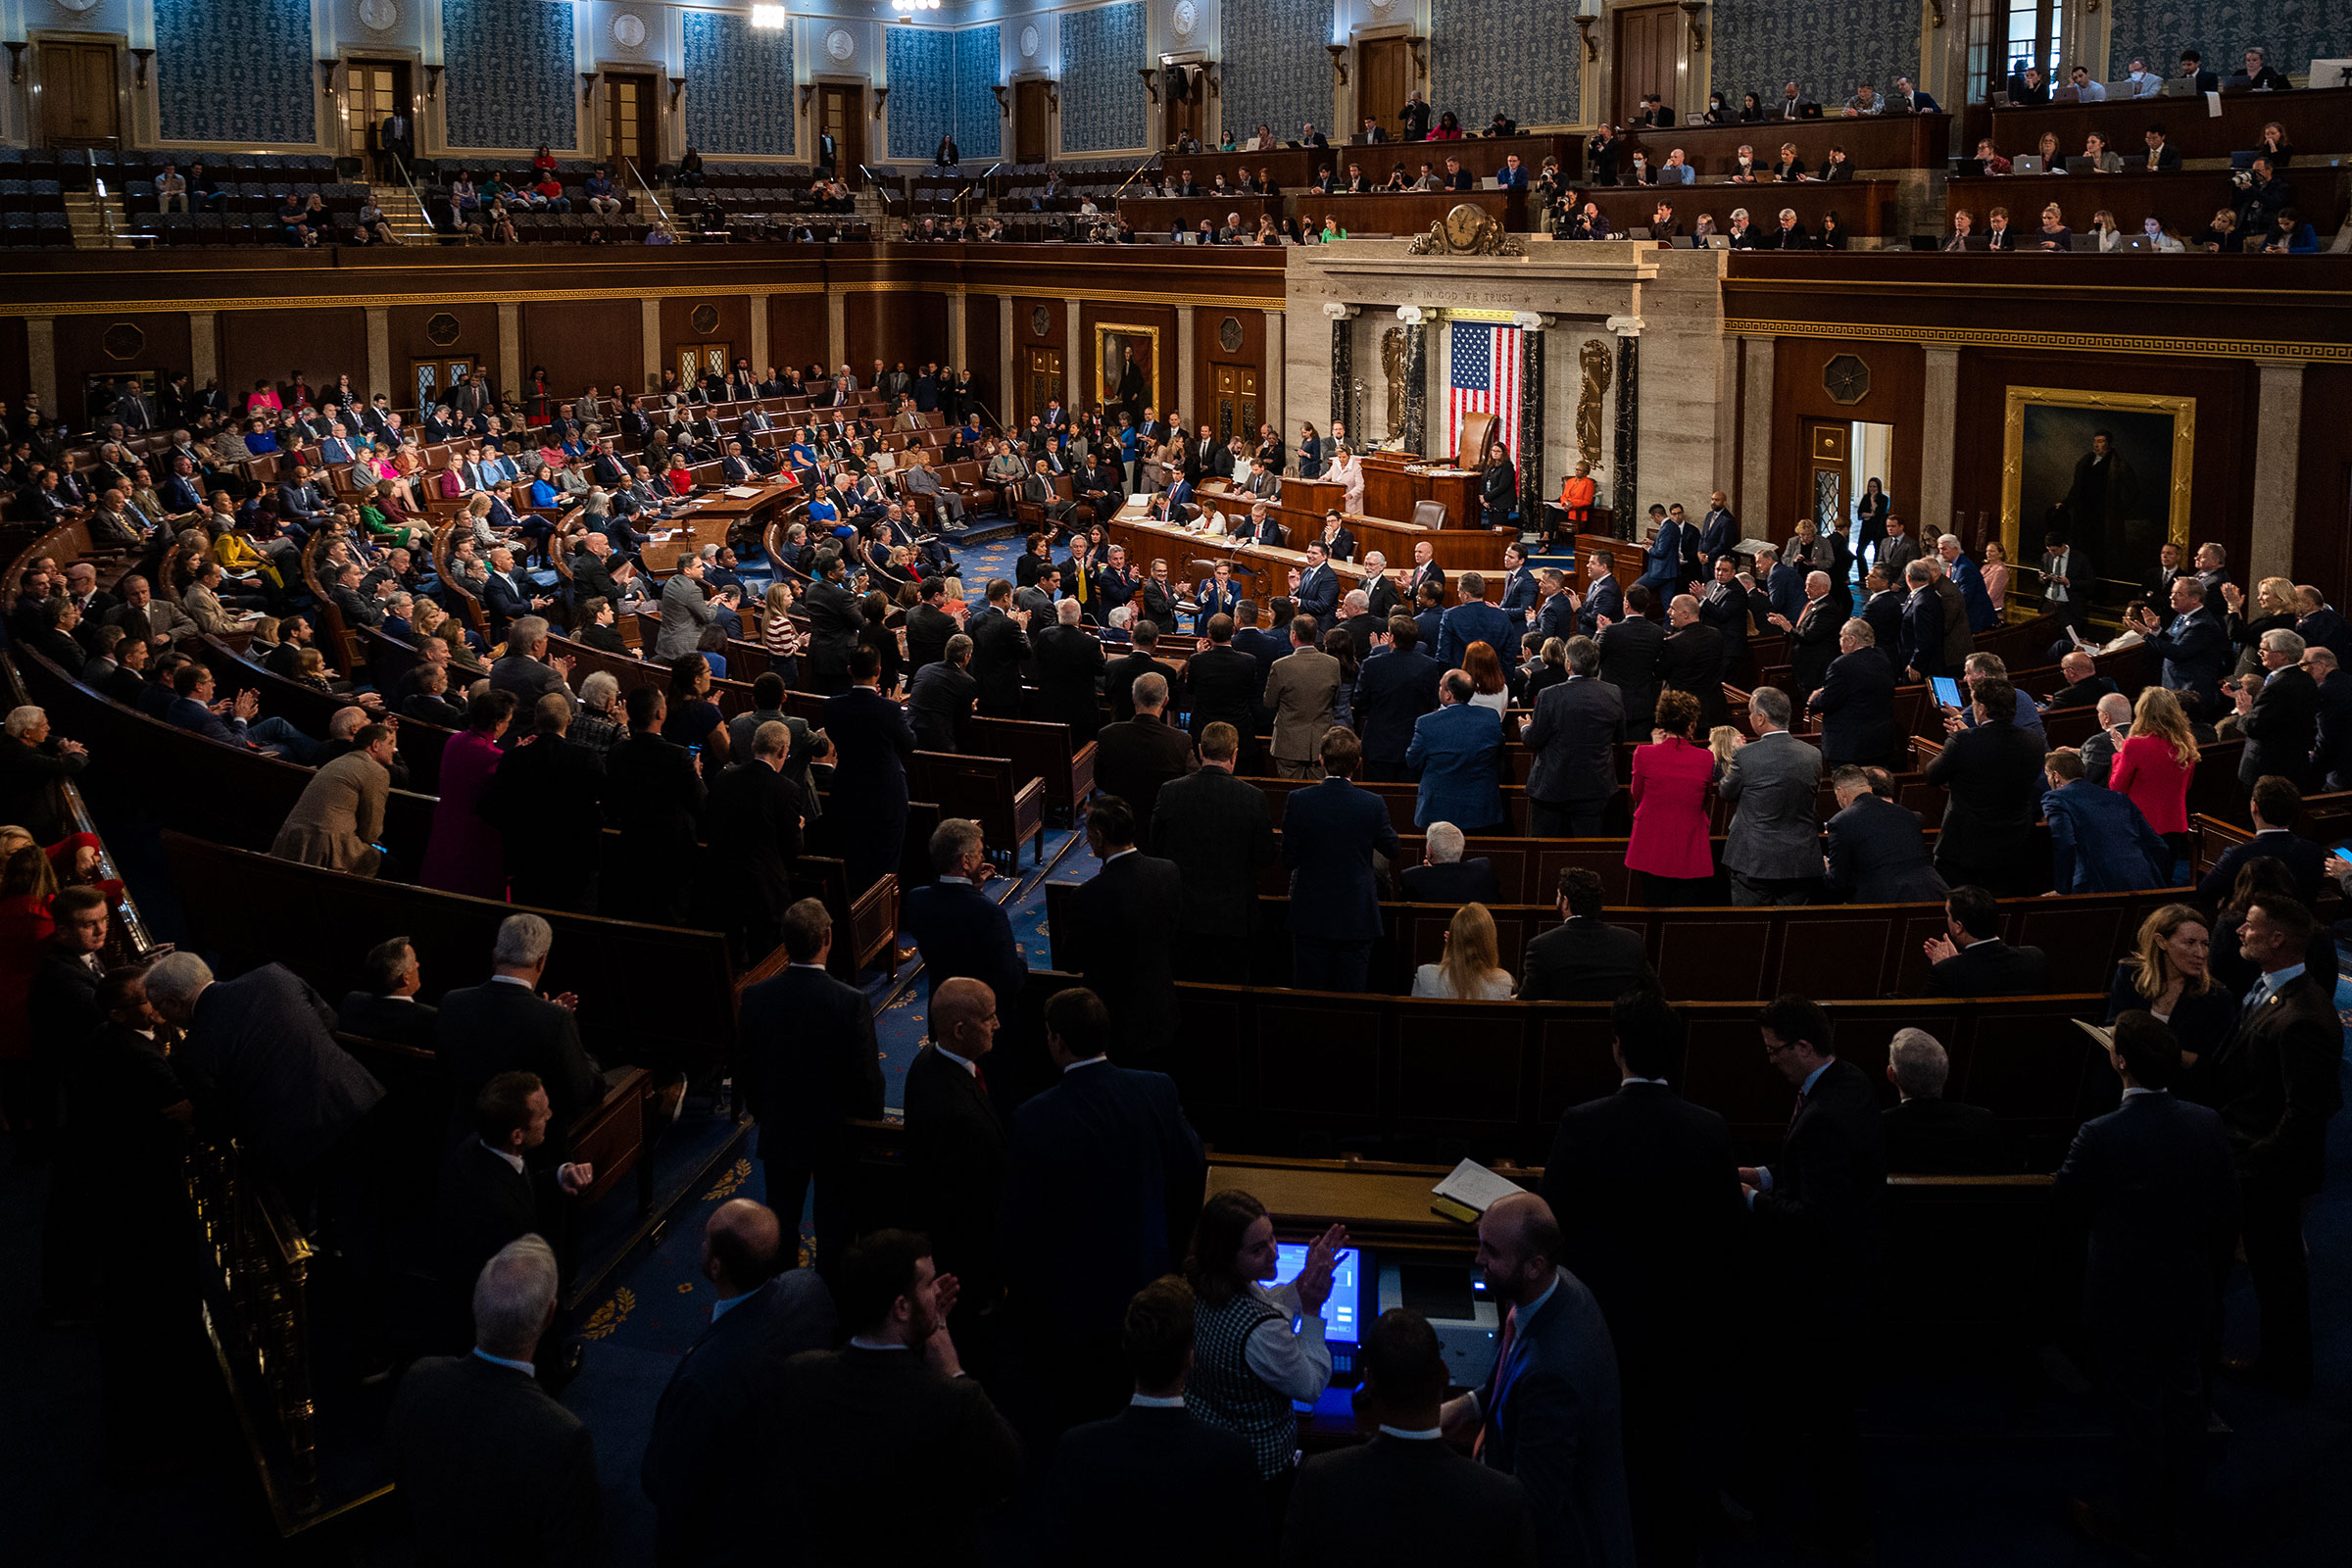 Members of the House of Representatives participate in an 8th vote for House Speaker in Washington, on Jan. 5th, 2022. (Nathan Posner—Anadolu Agency/Getty Images)